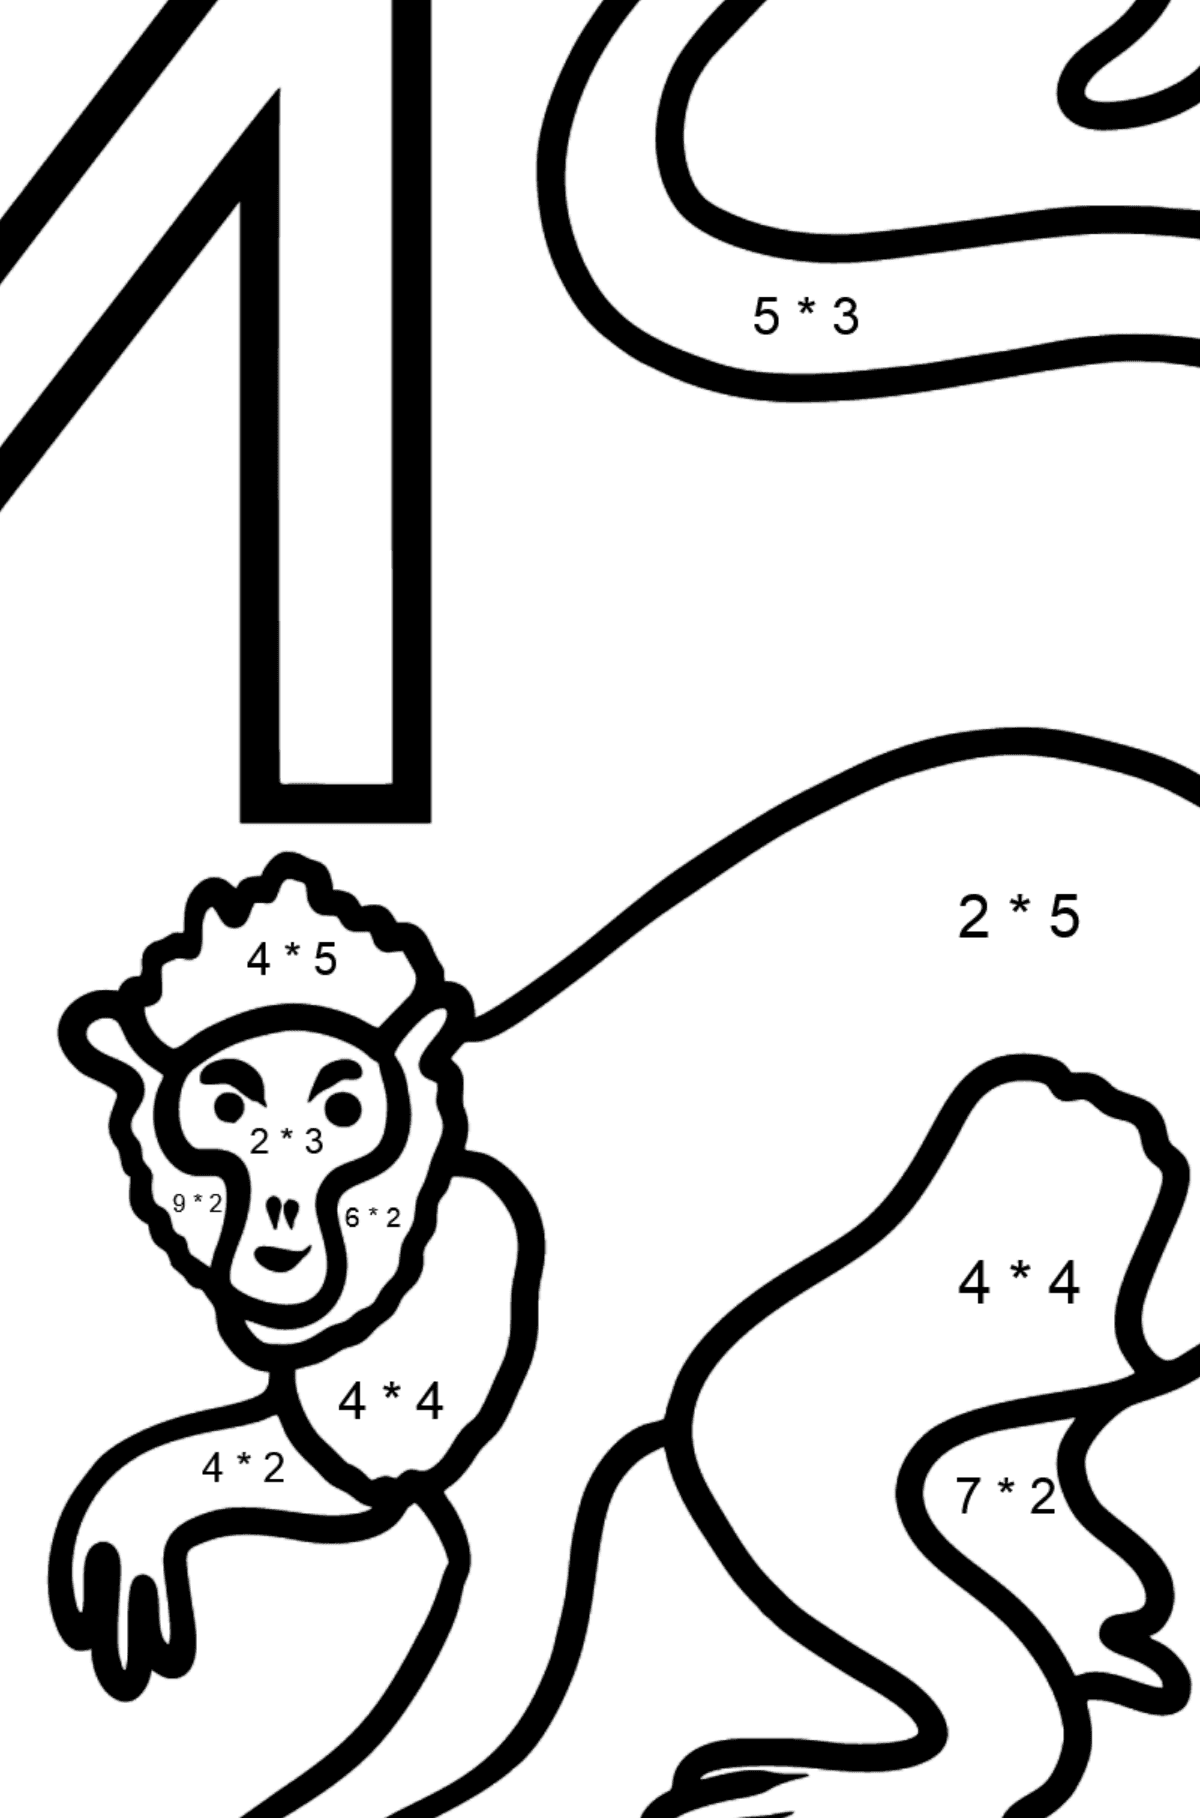 Portuguese Letter M coloring pages - MACACO - Math Coloring - Multiplication for Kids